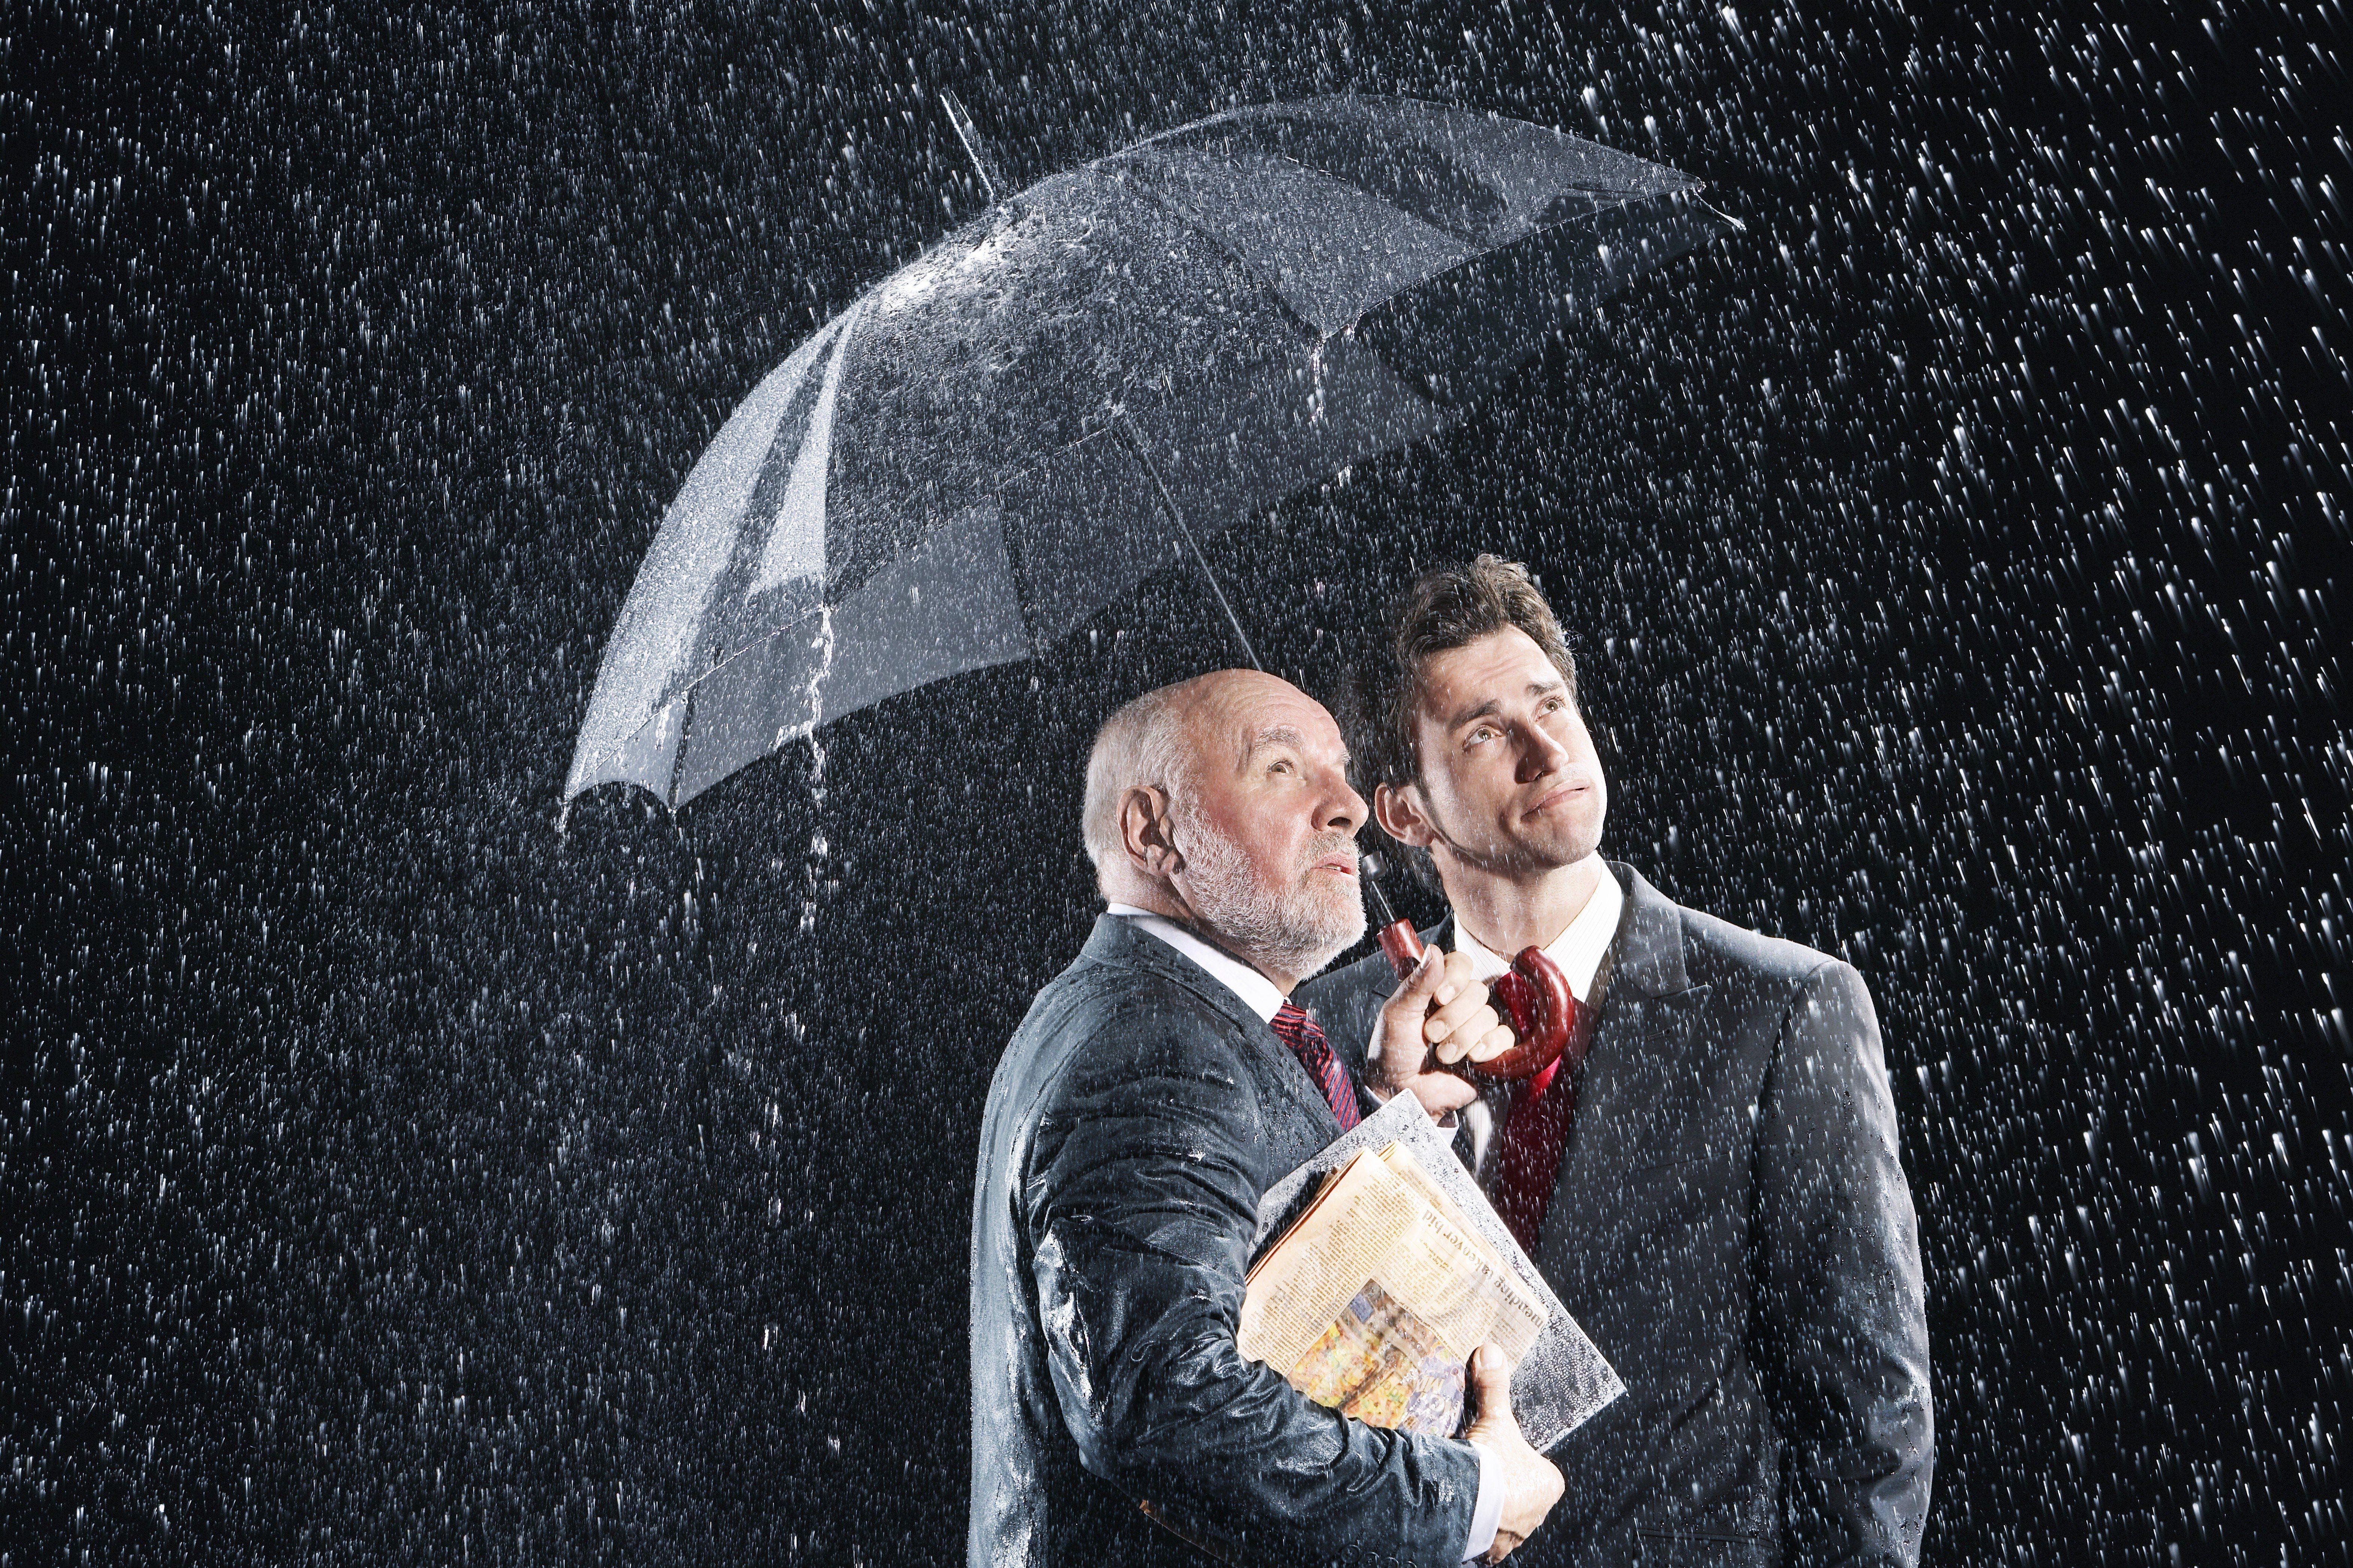 Two men in suits standing under an umbrella in the rain and holding file folder